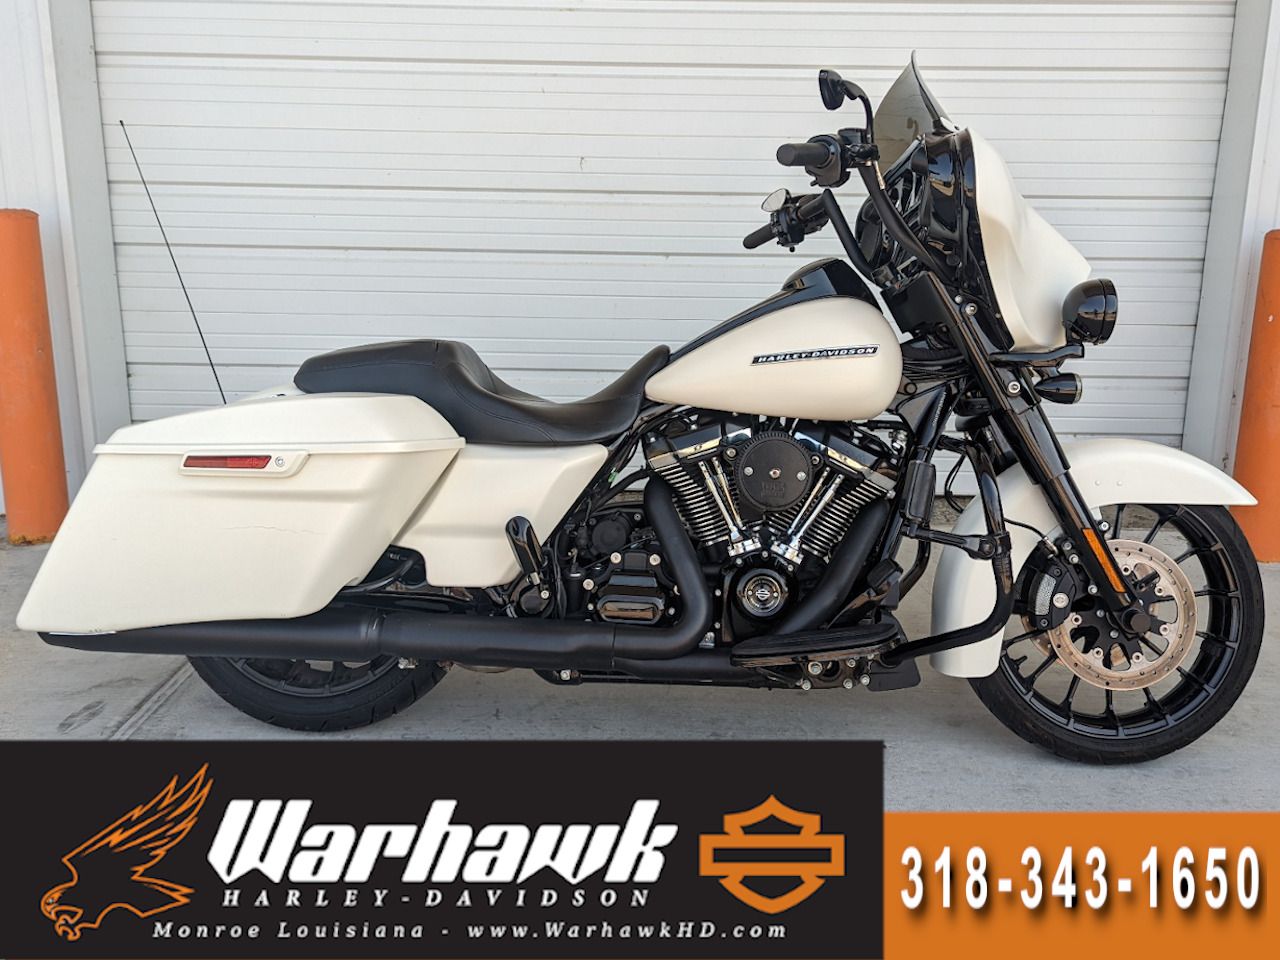 2018 harley-davidson street glide special for sale near me - Photo 1